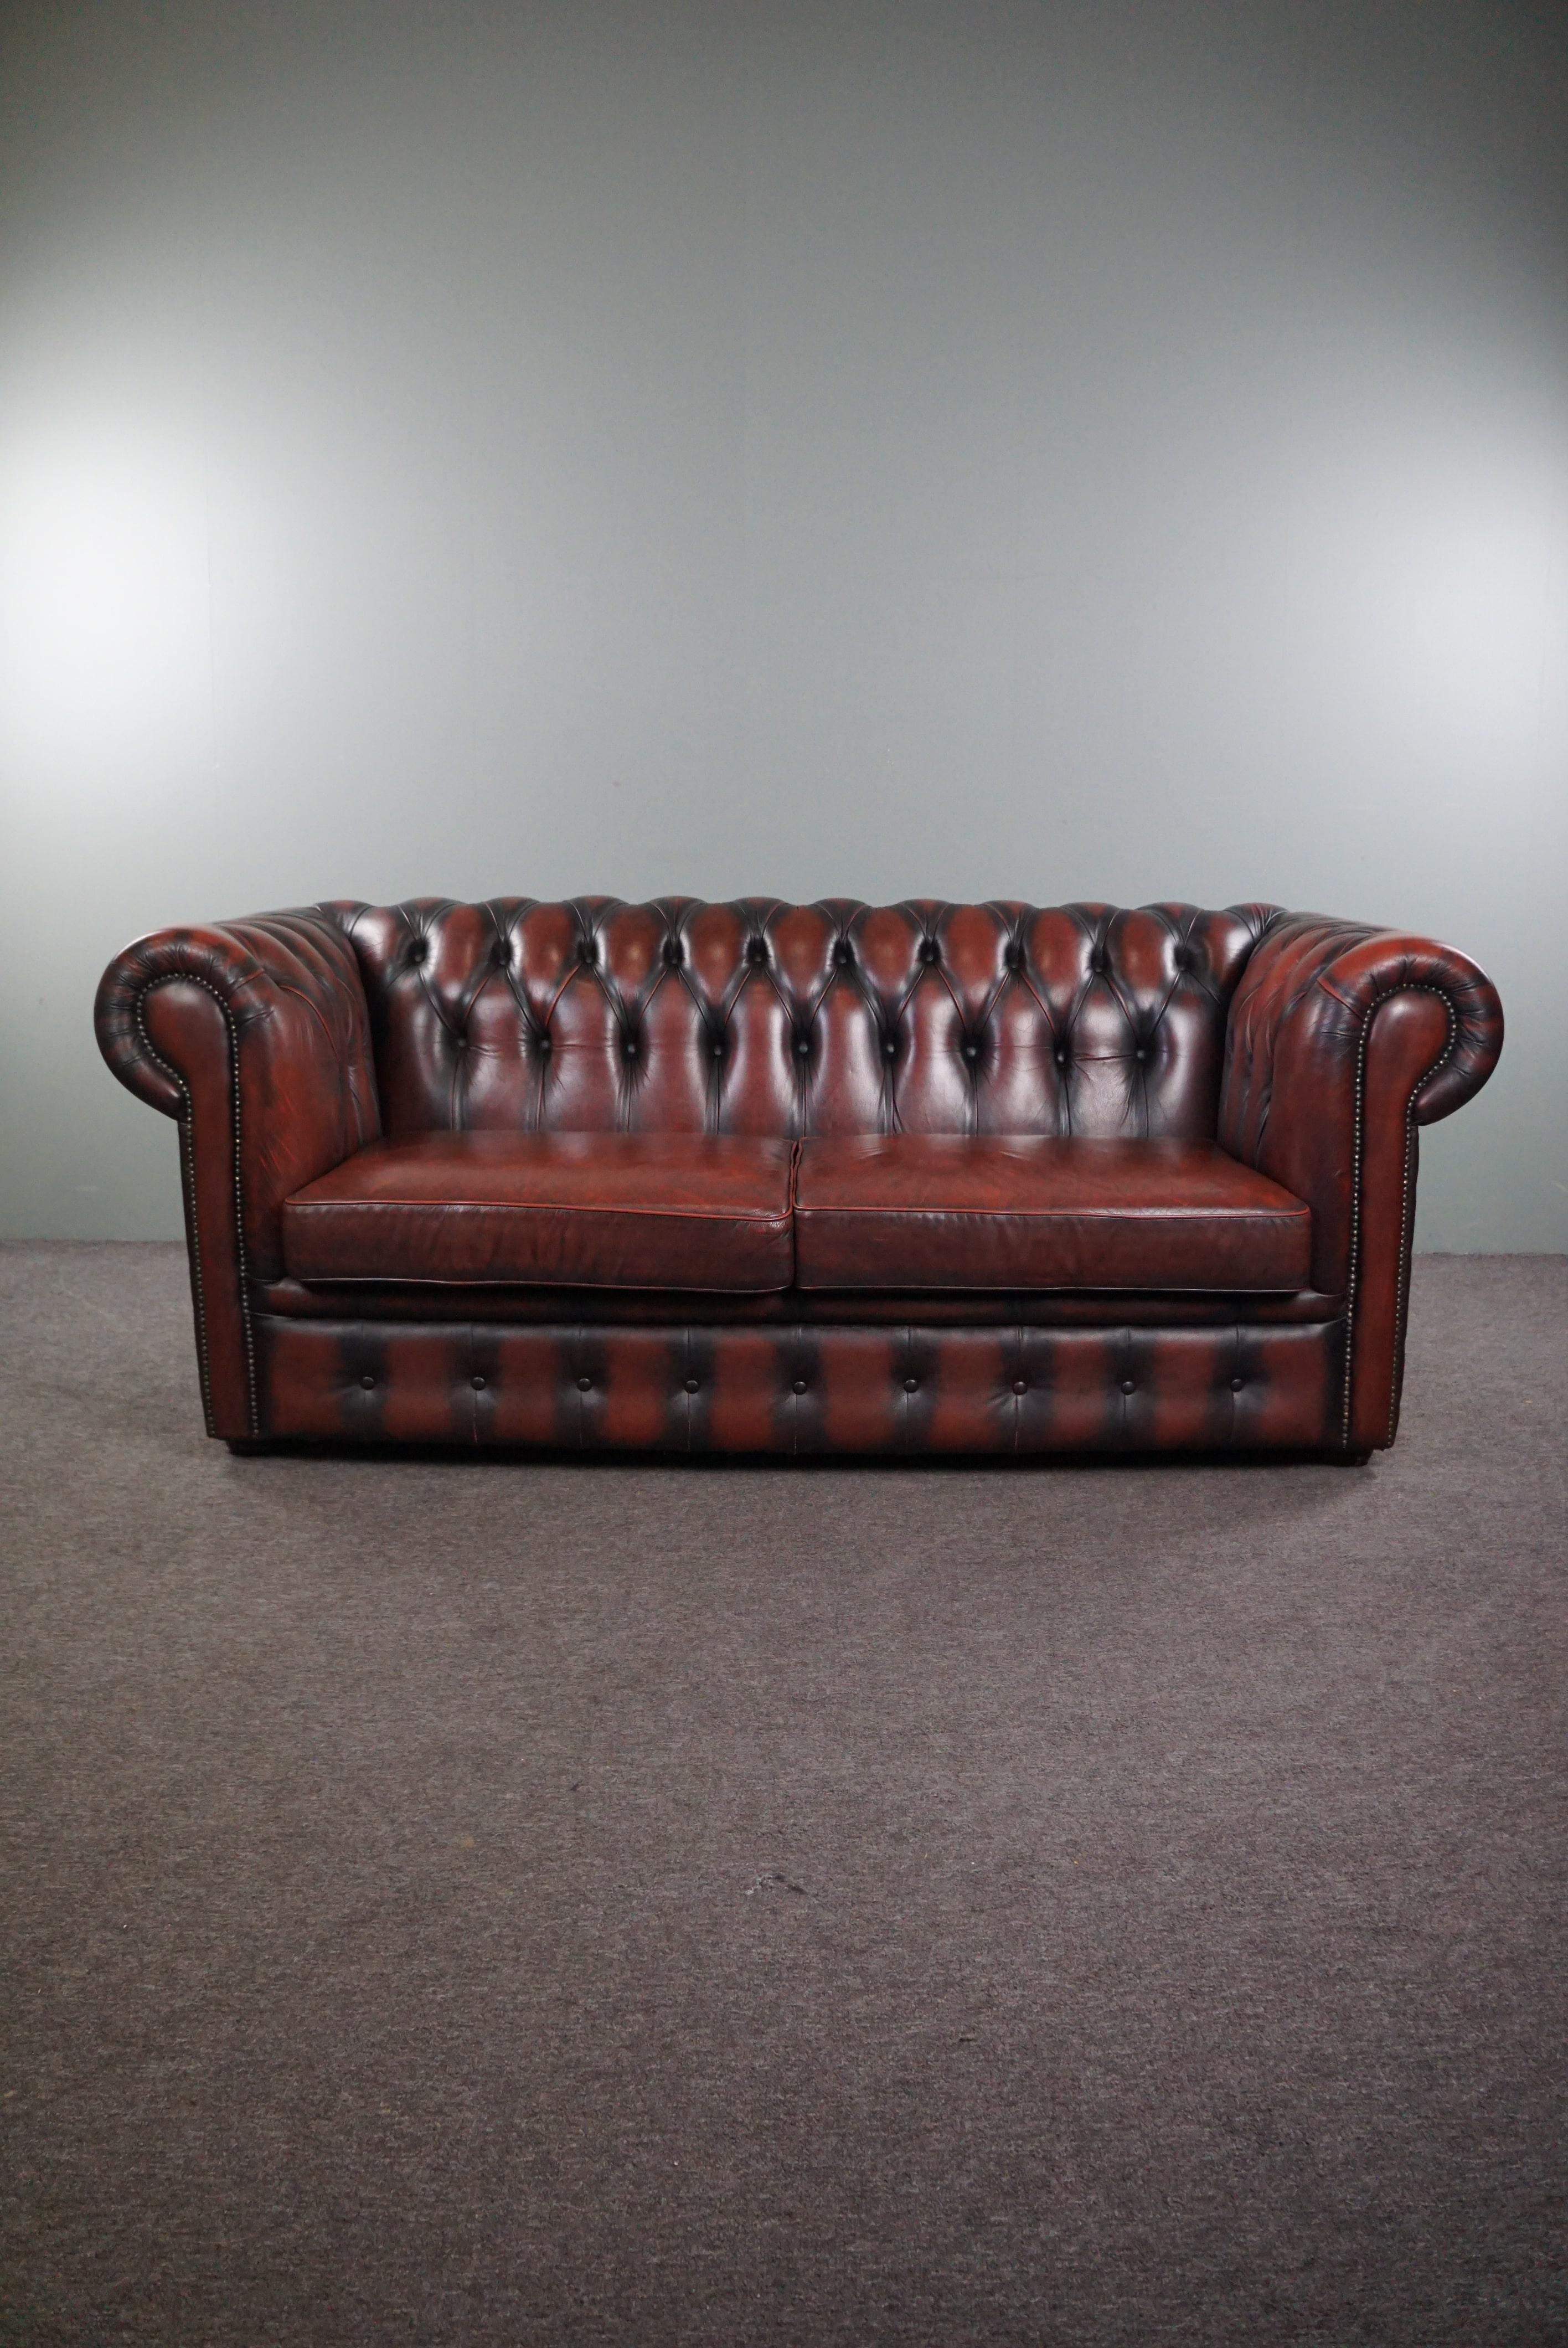 With pride we offer you this stunningly colored red cowhide Chesterfield sofa, spacious 2-seater.

Presented is this wonderfully comfortable, distinctly colored cowhide 2-seater Chesterfield sofa. This deep red Chesterfield sofa features a tufted